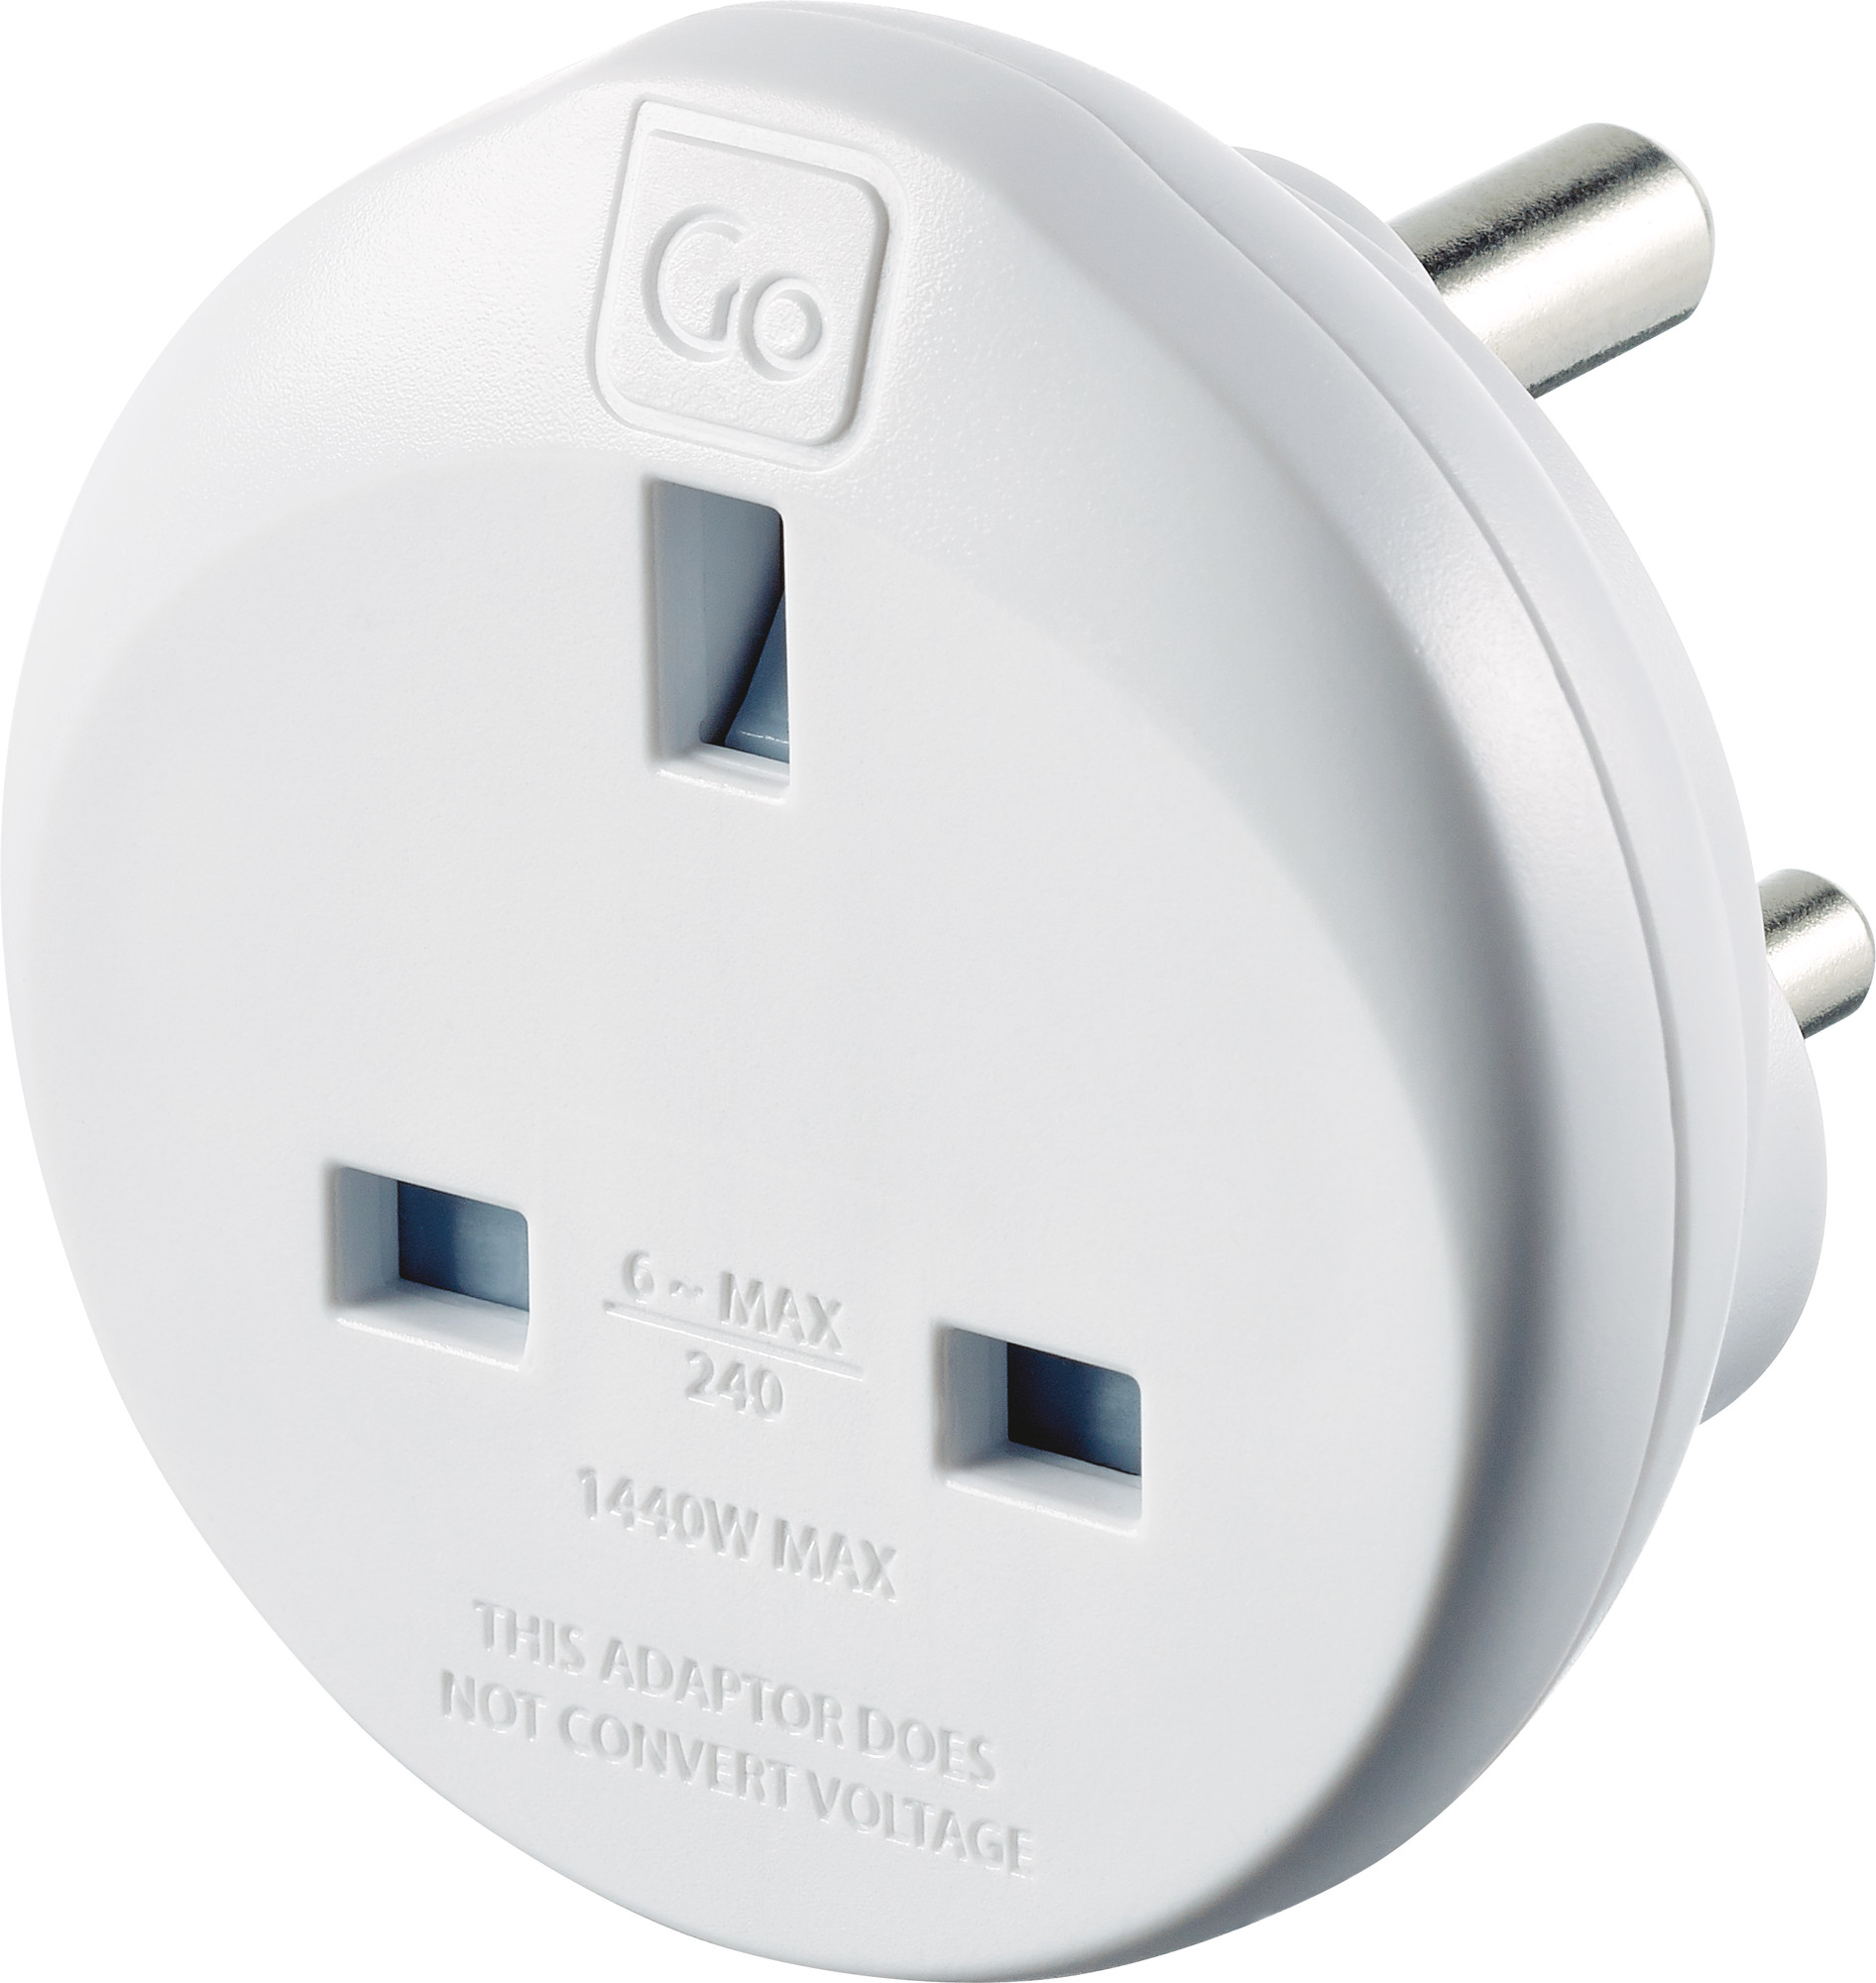 Picture of Go Travel UK India Adapter